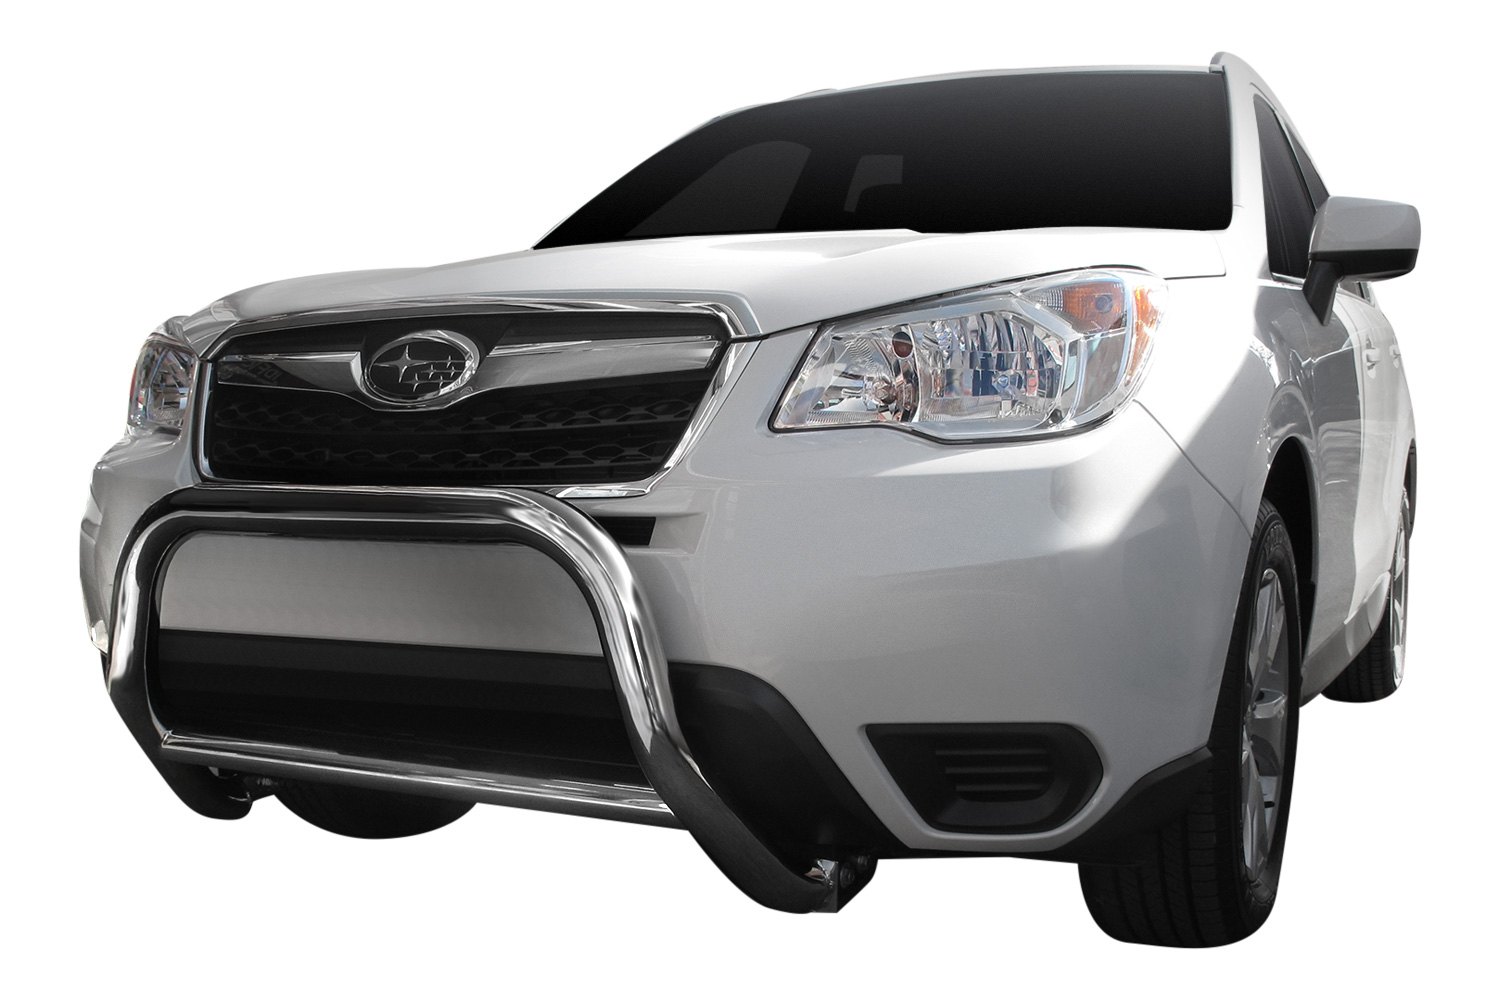 Broadfeet A-Bar Front Bumper Guard Protector For Subaru Forester 2014-2017 SST